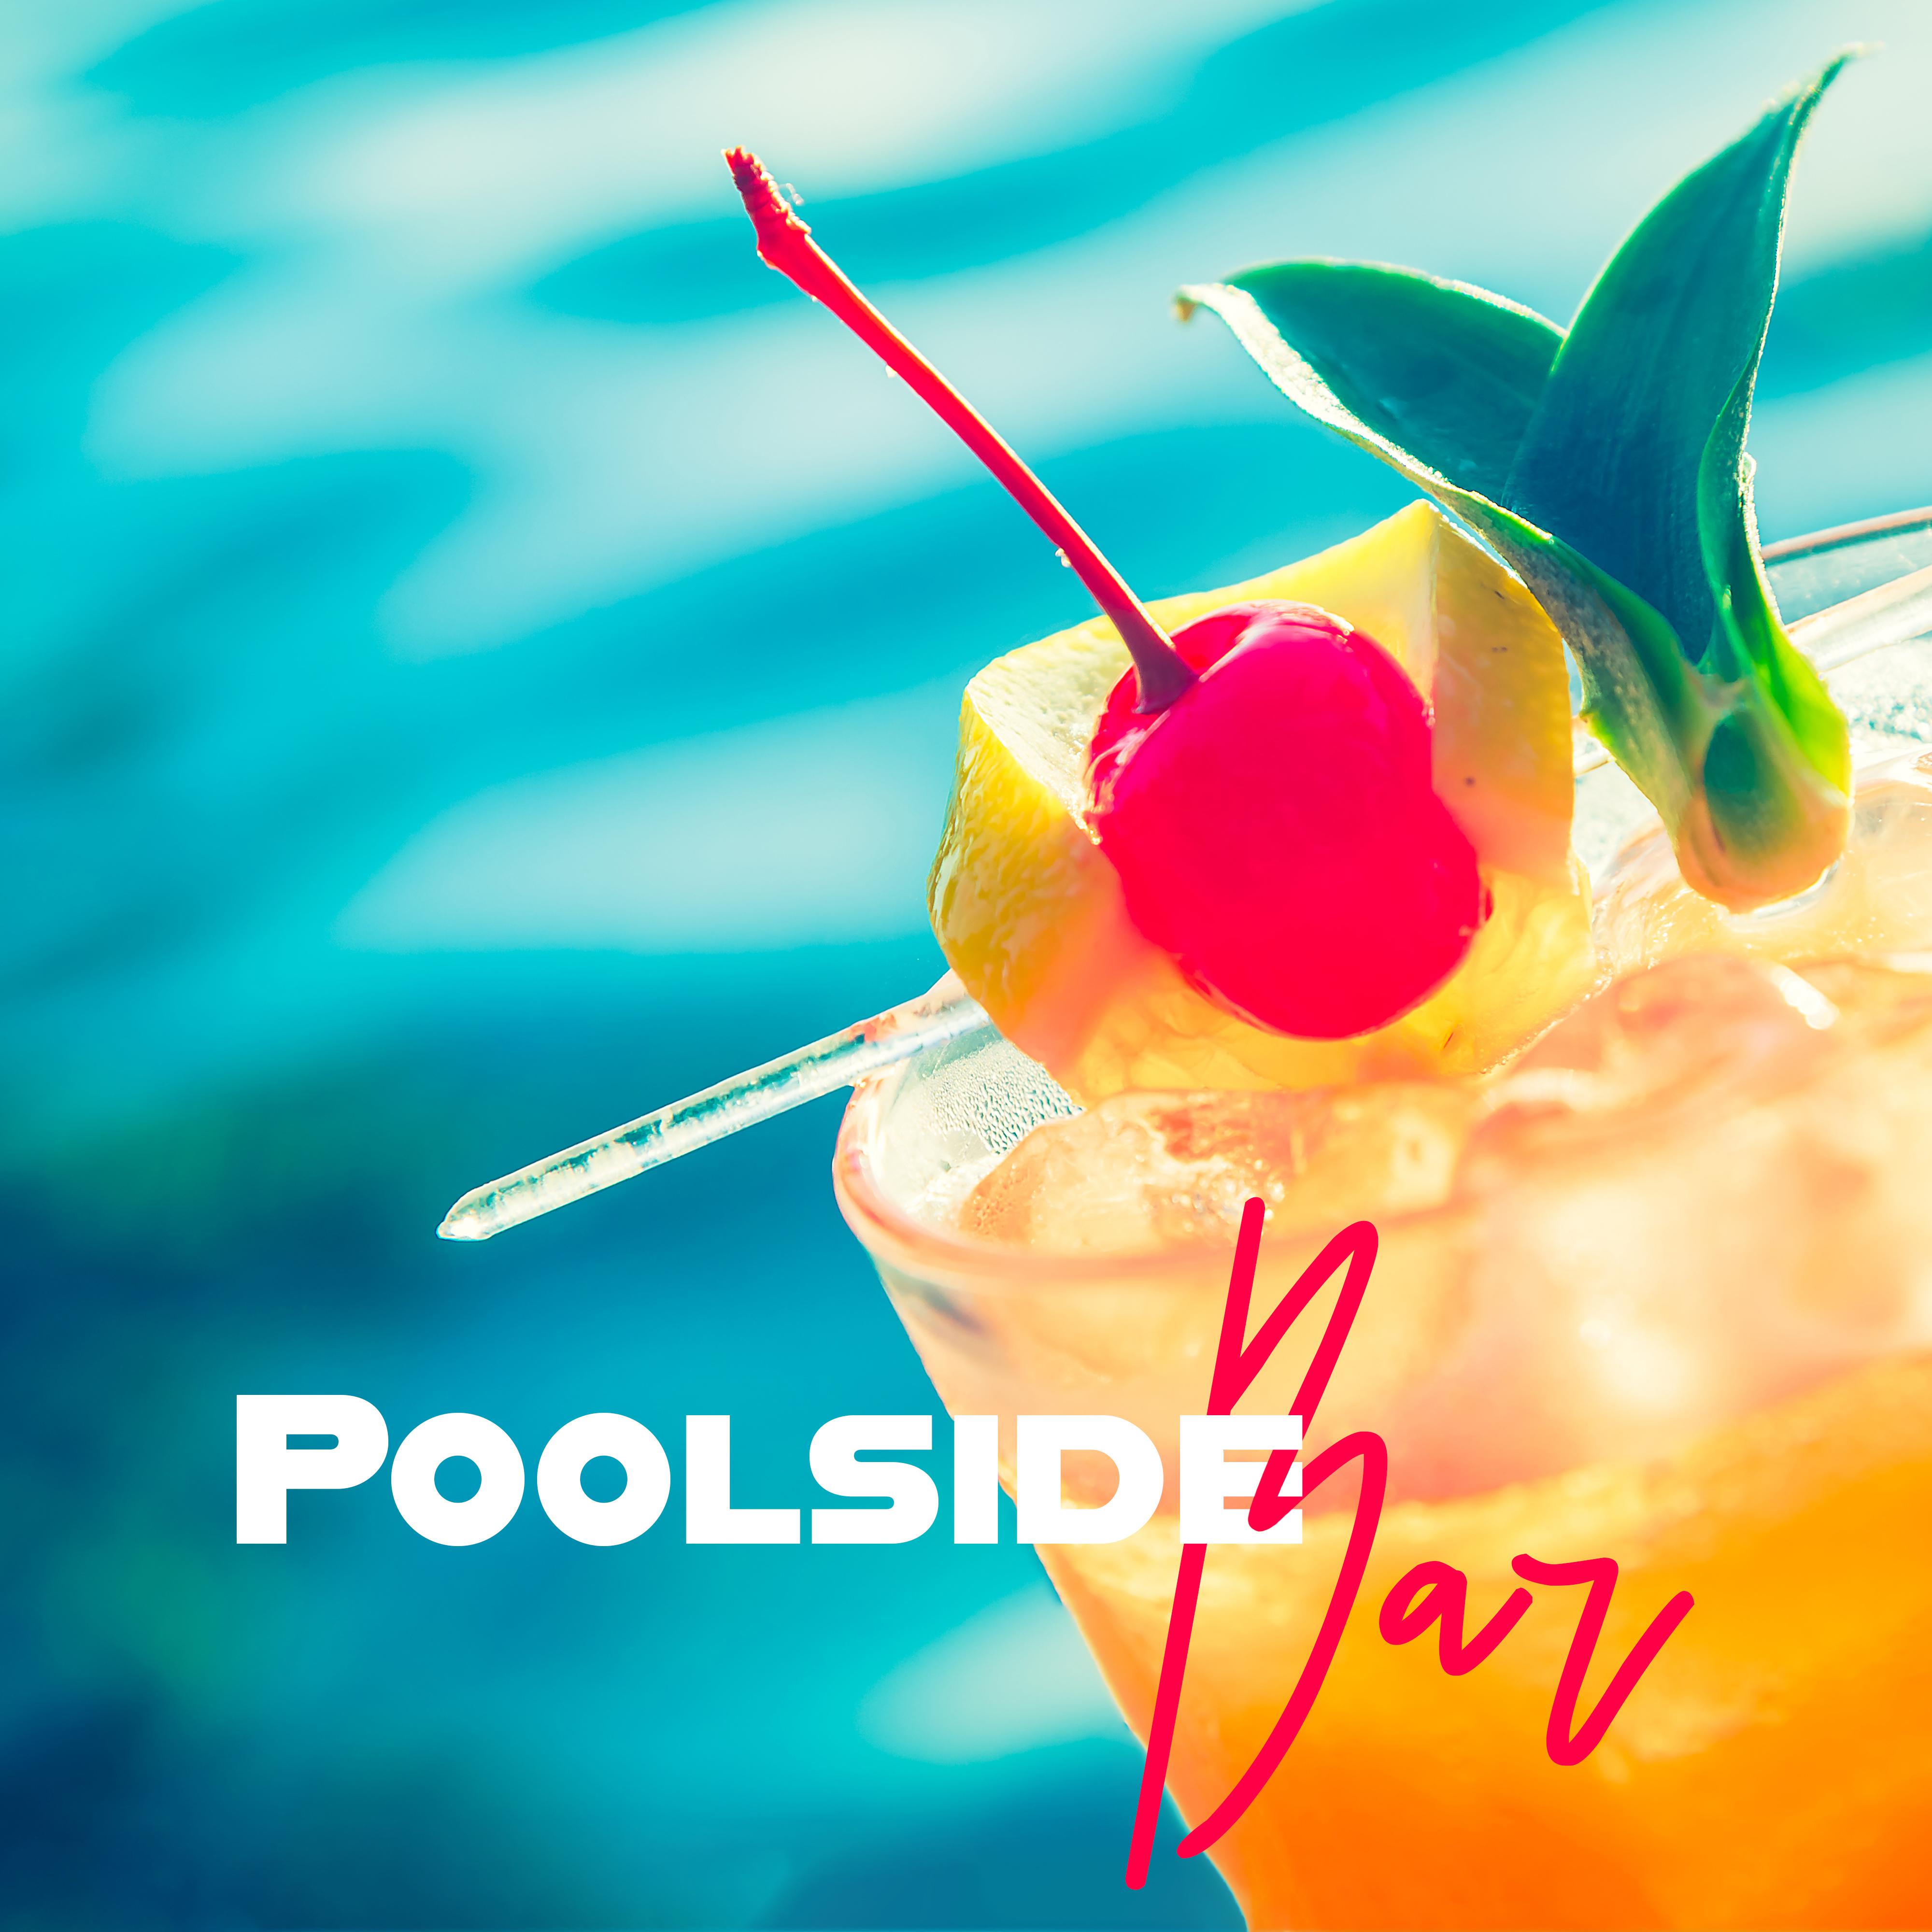 Poolside Bar – Cocktail Music, Ibiza Chill Out, Chilled Bar Lounge, Ibiza 2019, Relax, Chill, Beach Music, Calm Down, Ambient Music